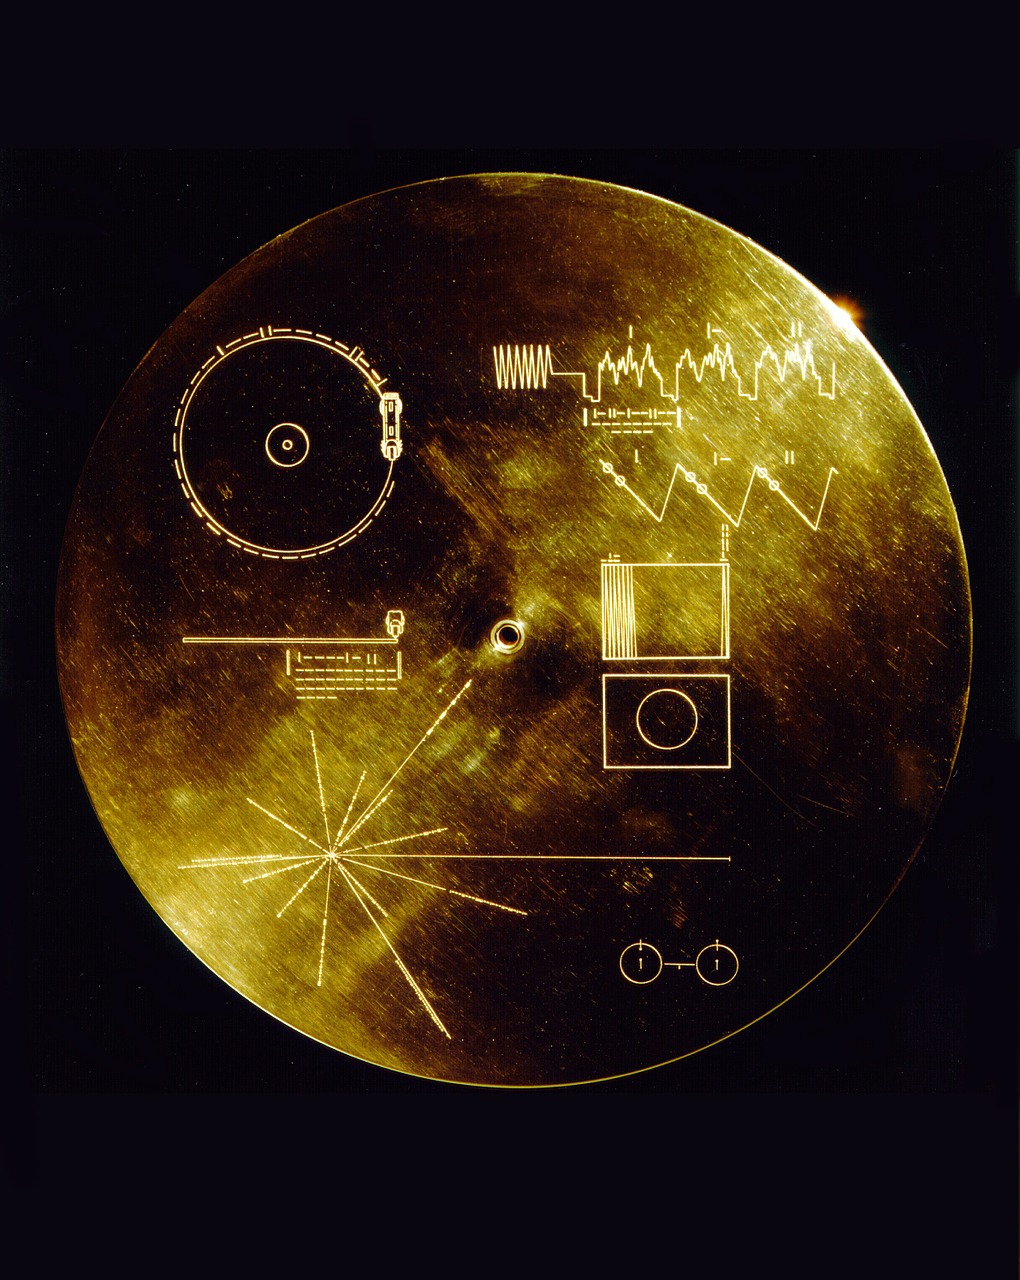 space travel voyager golden record data sheets free photo